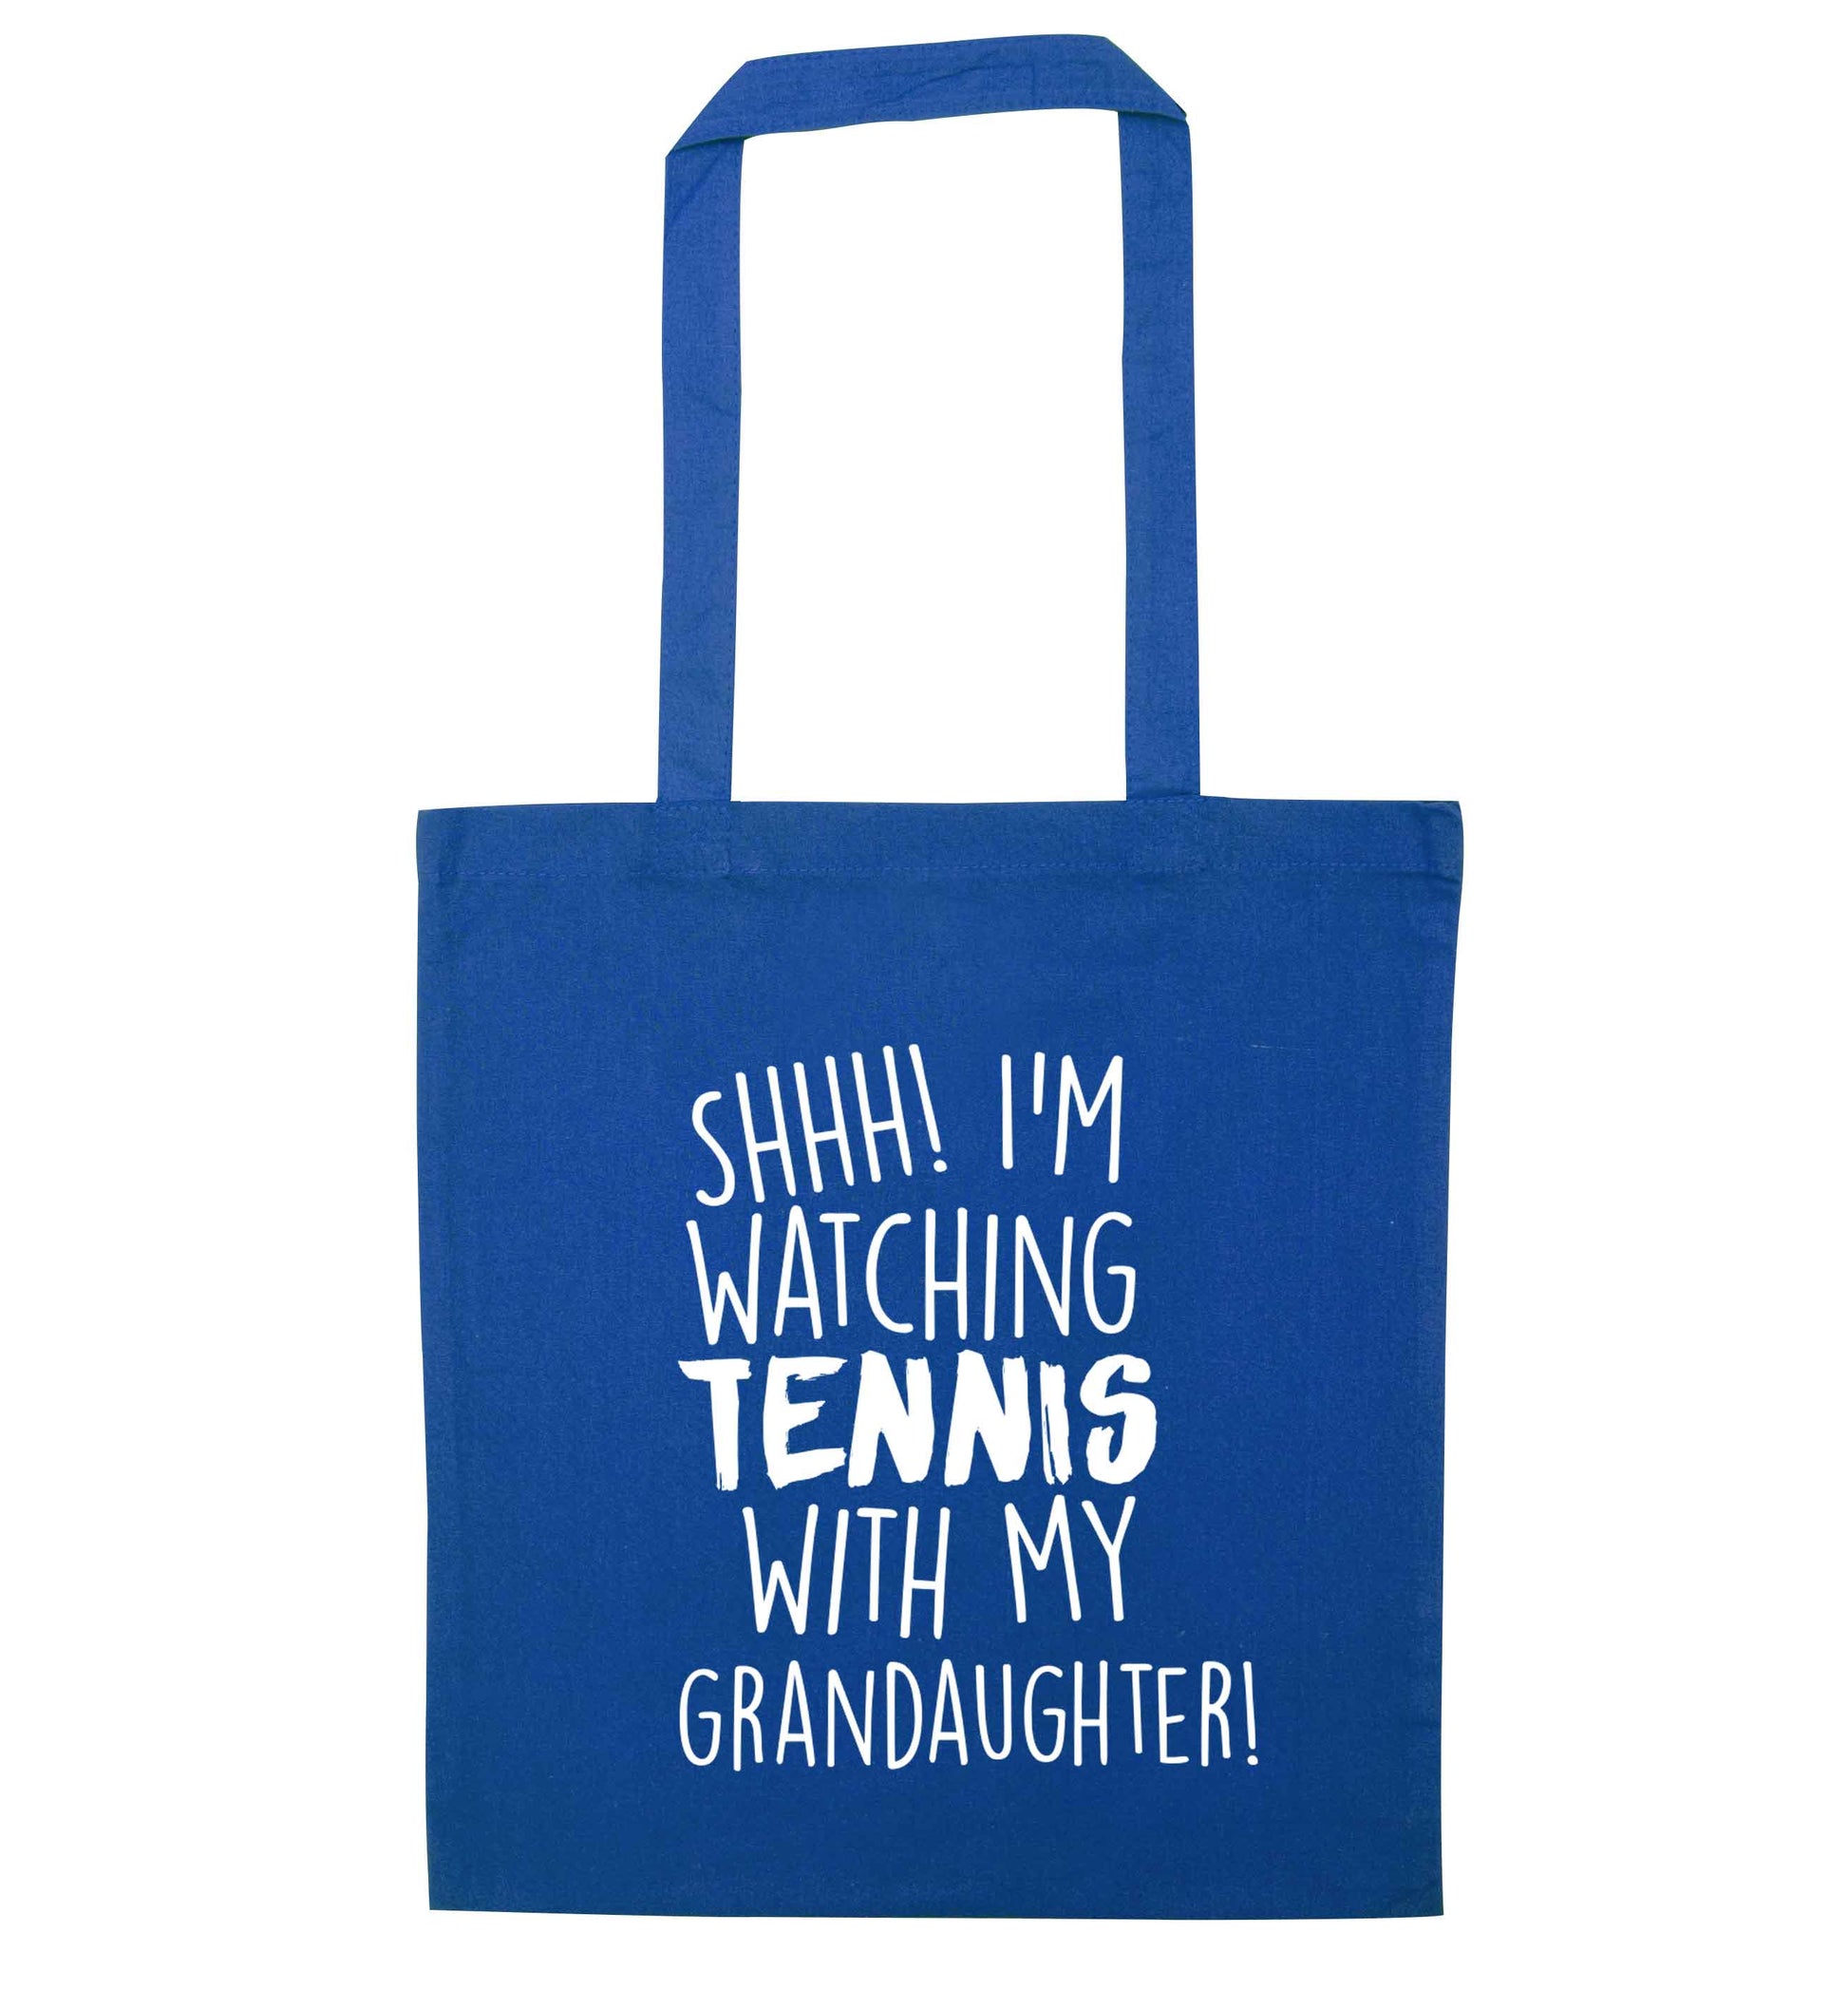 Shh! I'm watching tennis with my granddaughter! blue tote bag